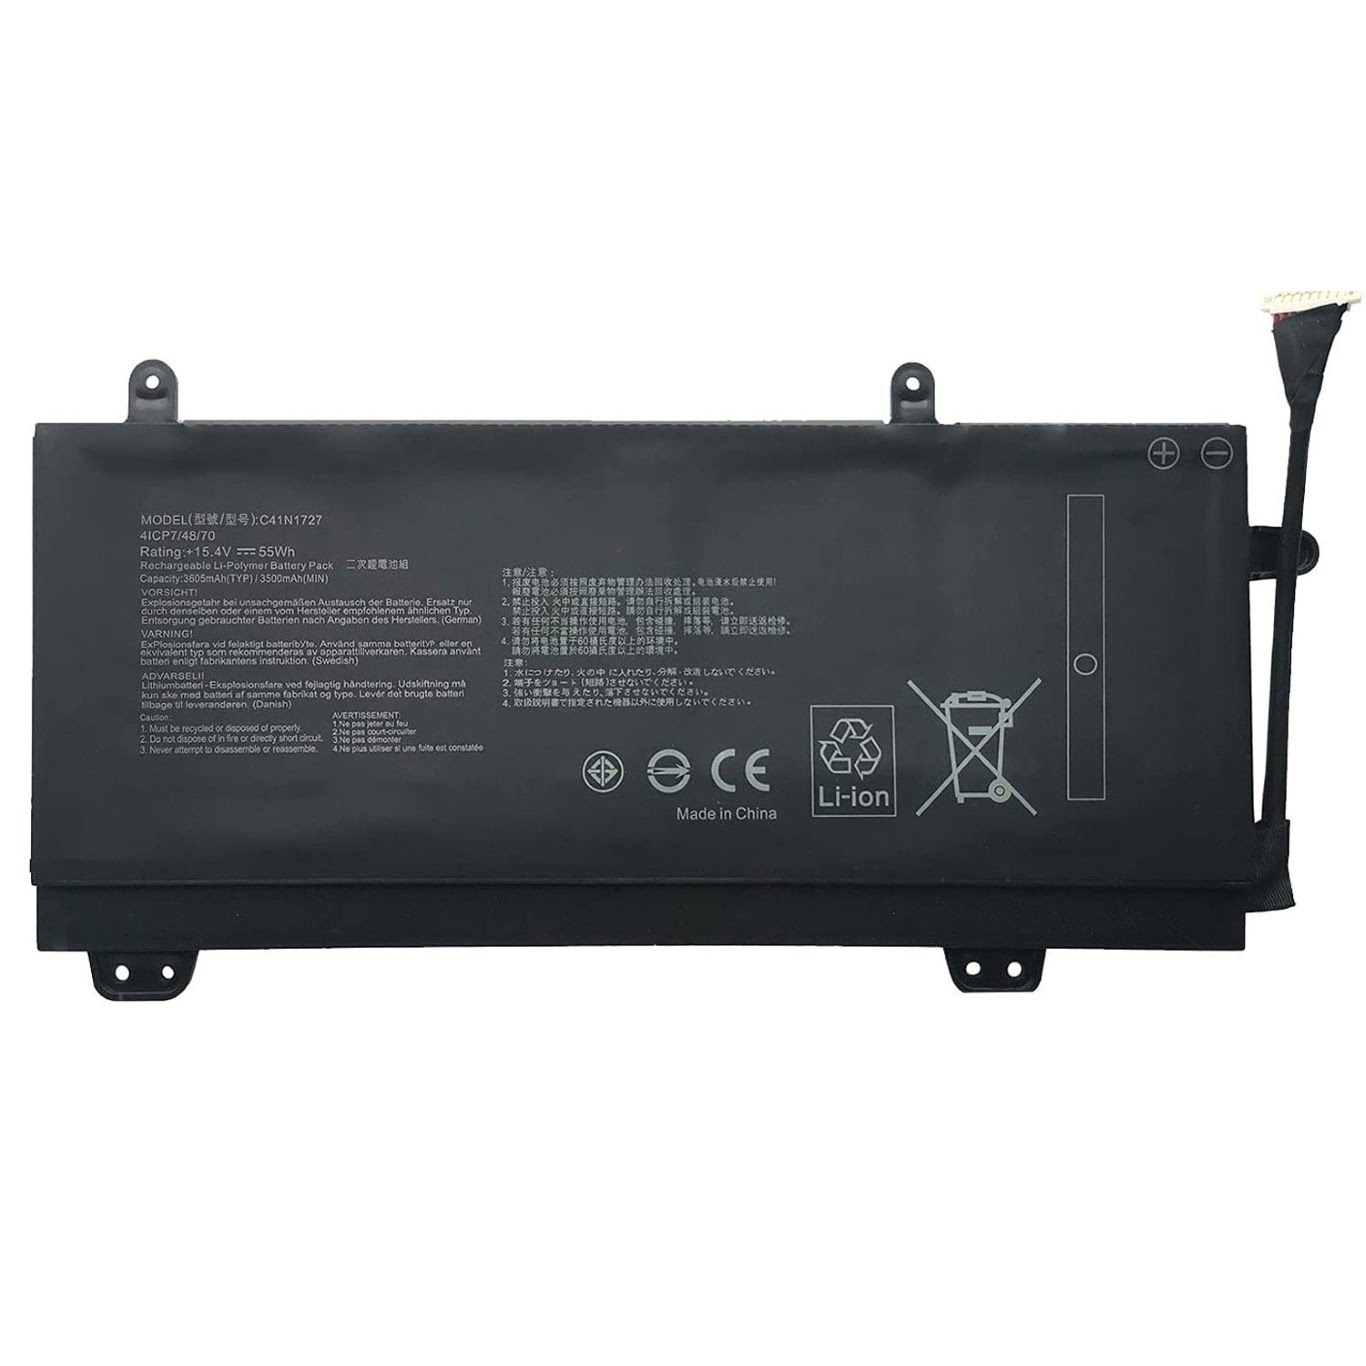 0B200-02900000, 4ICP7/48/70 replacement Laptop Battery for Asus GM501GM, GM501GM-0021A8750H, 15.4v, 55wh